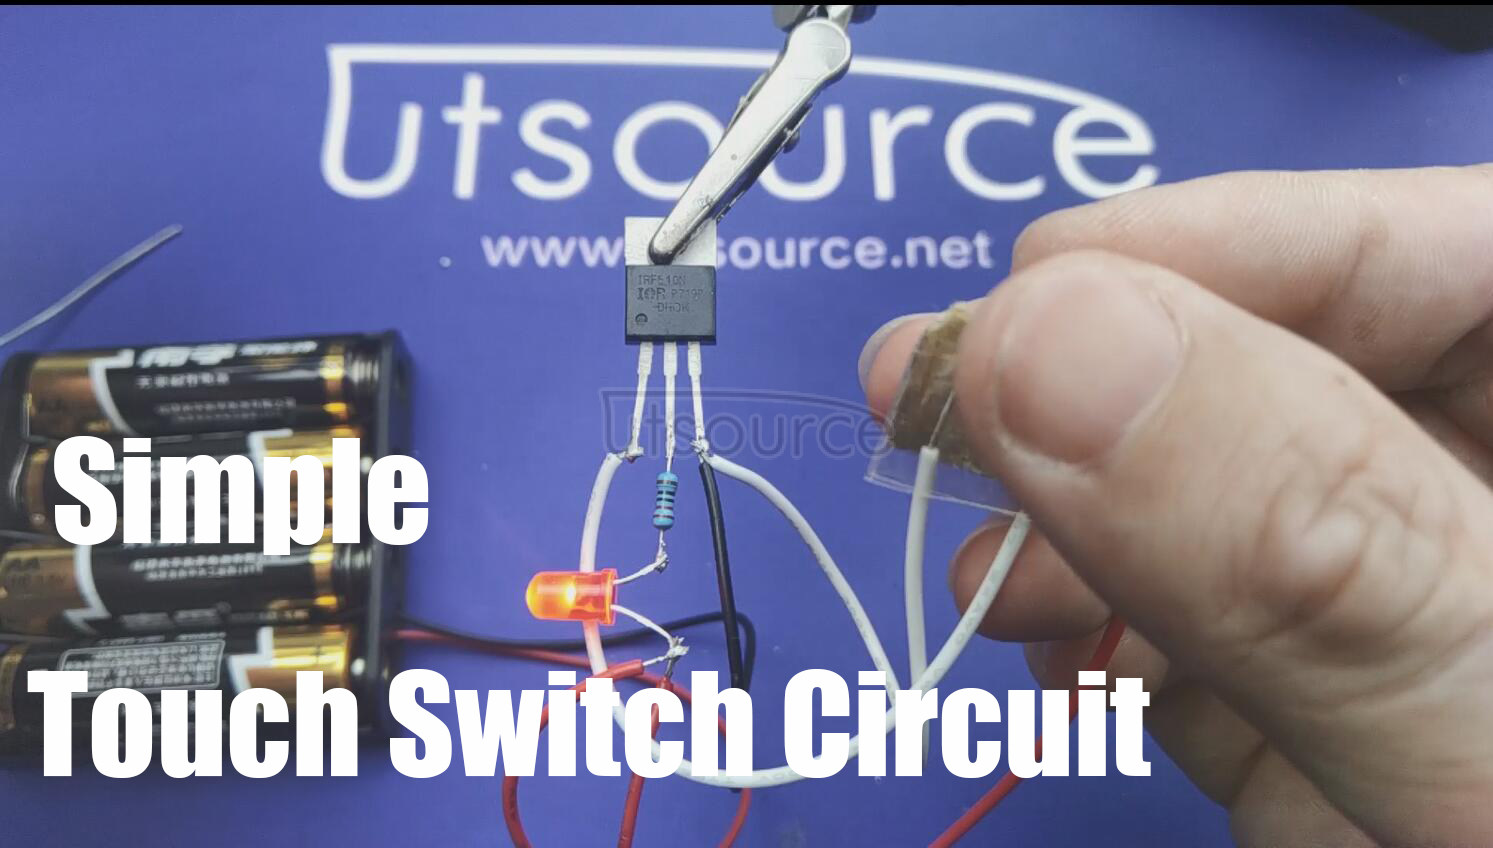 How to Make a Simple touch switch circuit using mosfet